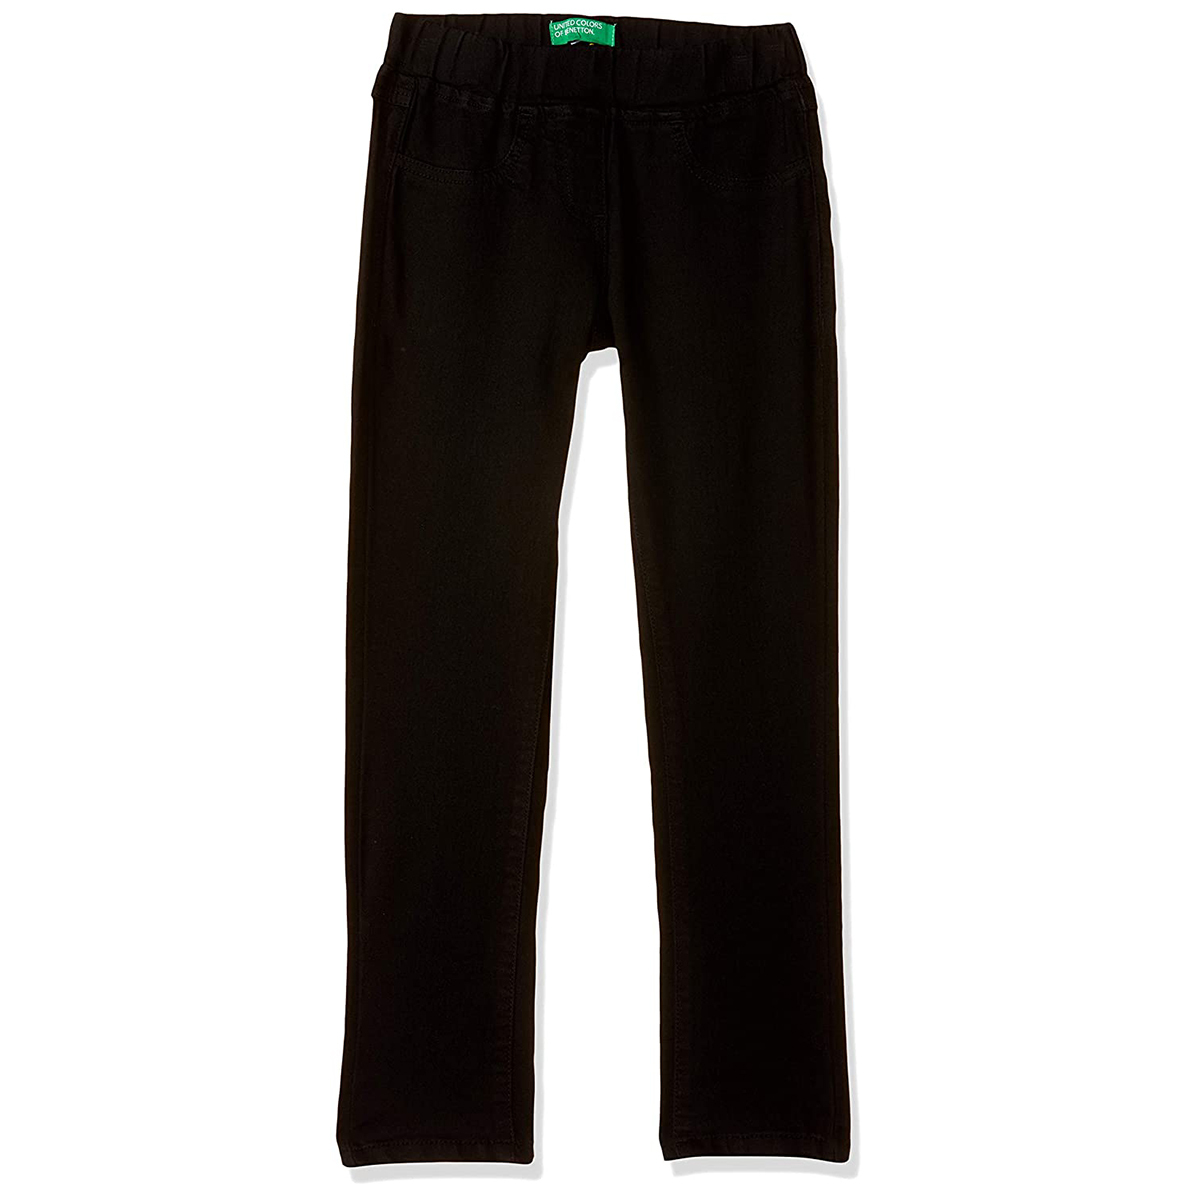 United Colors of Benetton Girl's Skinny Fit Pants- Black